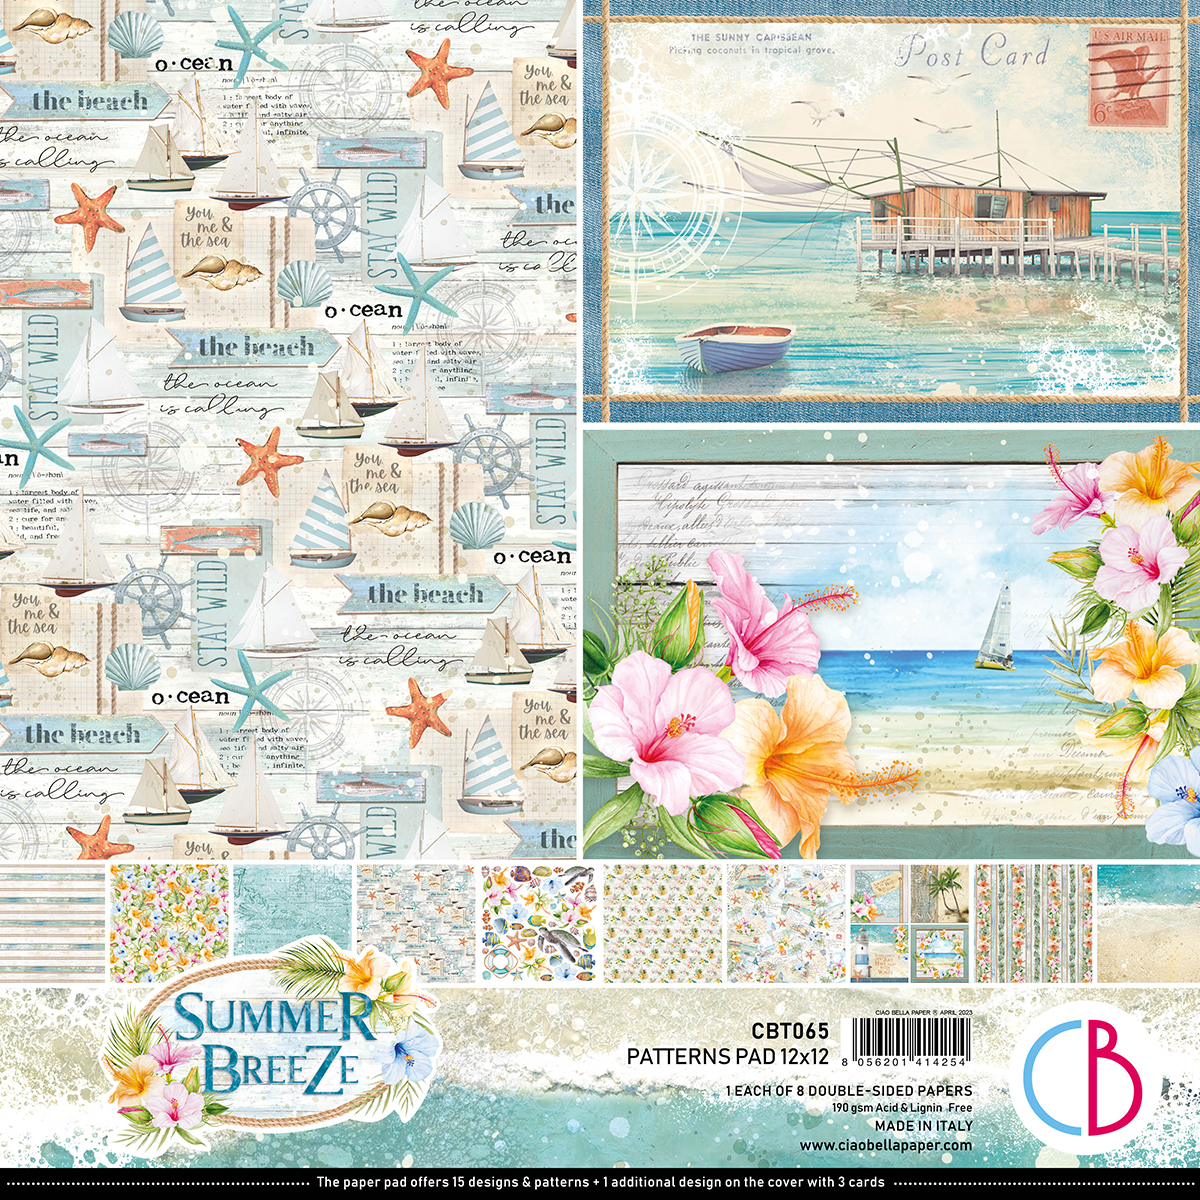 CIAO BELLA PATTERNS PAD 12X12- 8 PAPERS- SUMMER BREEZE